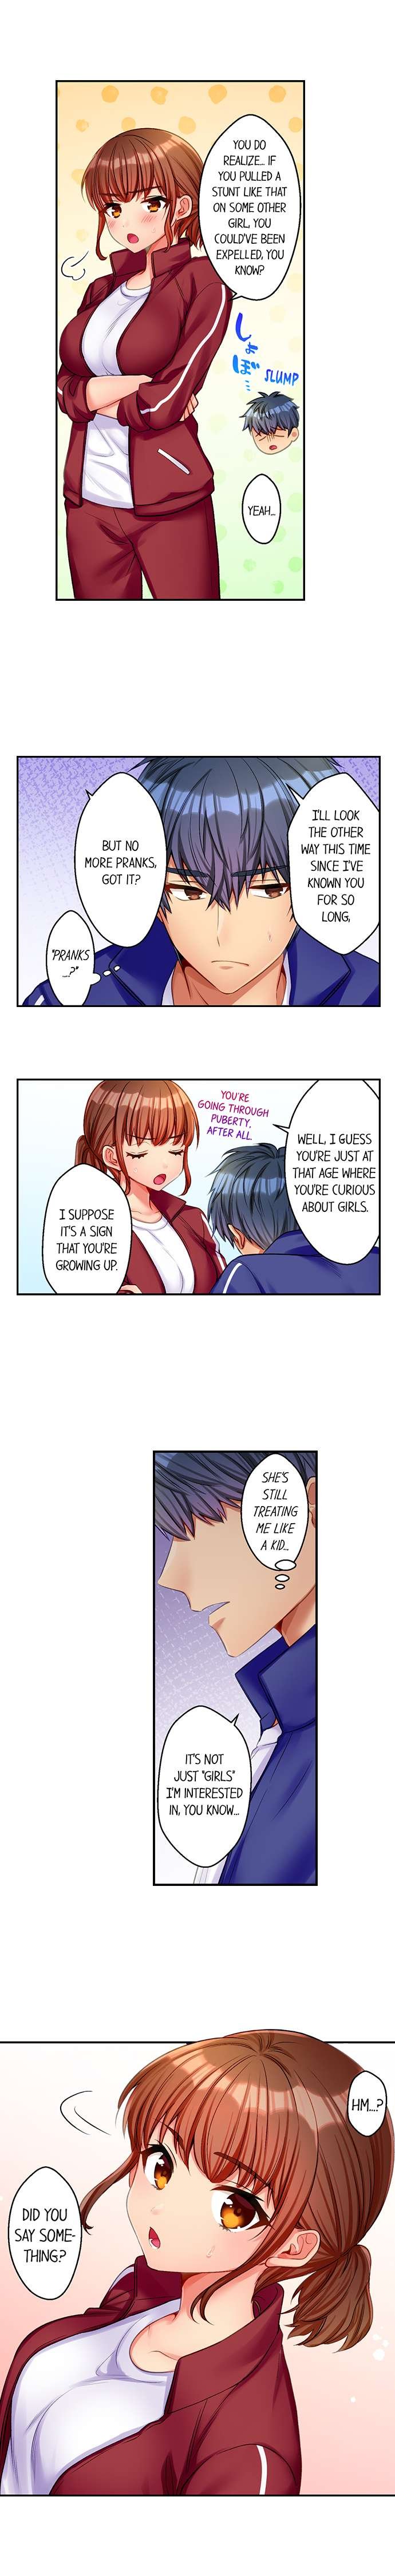 sexy-times-with-my-tiny-childhood-friend-chap-4-5